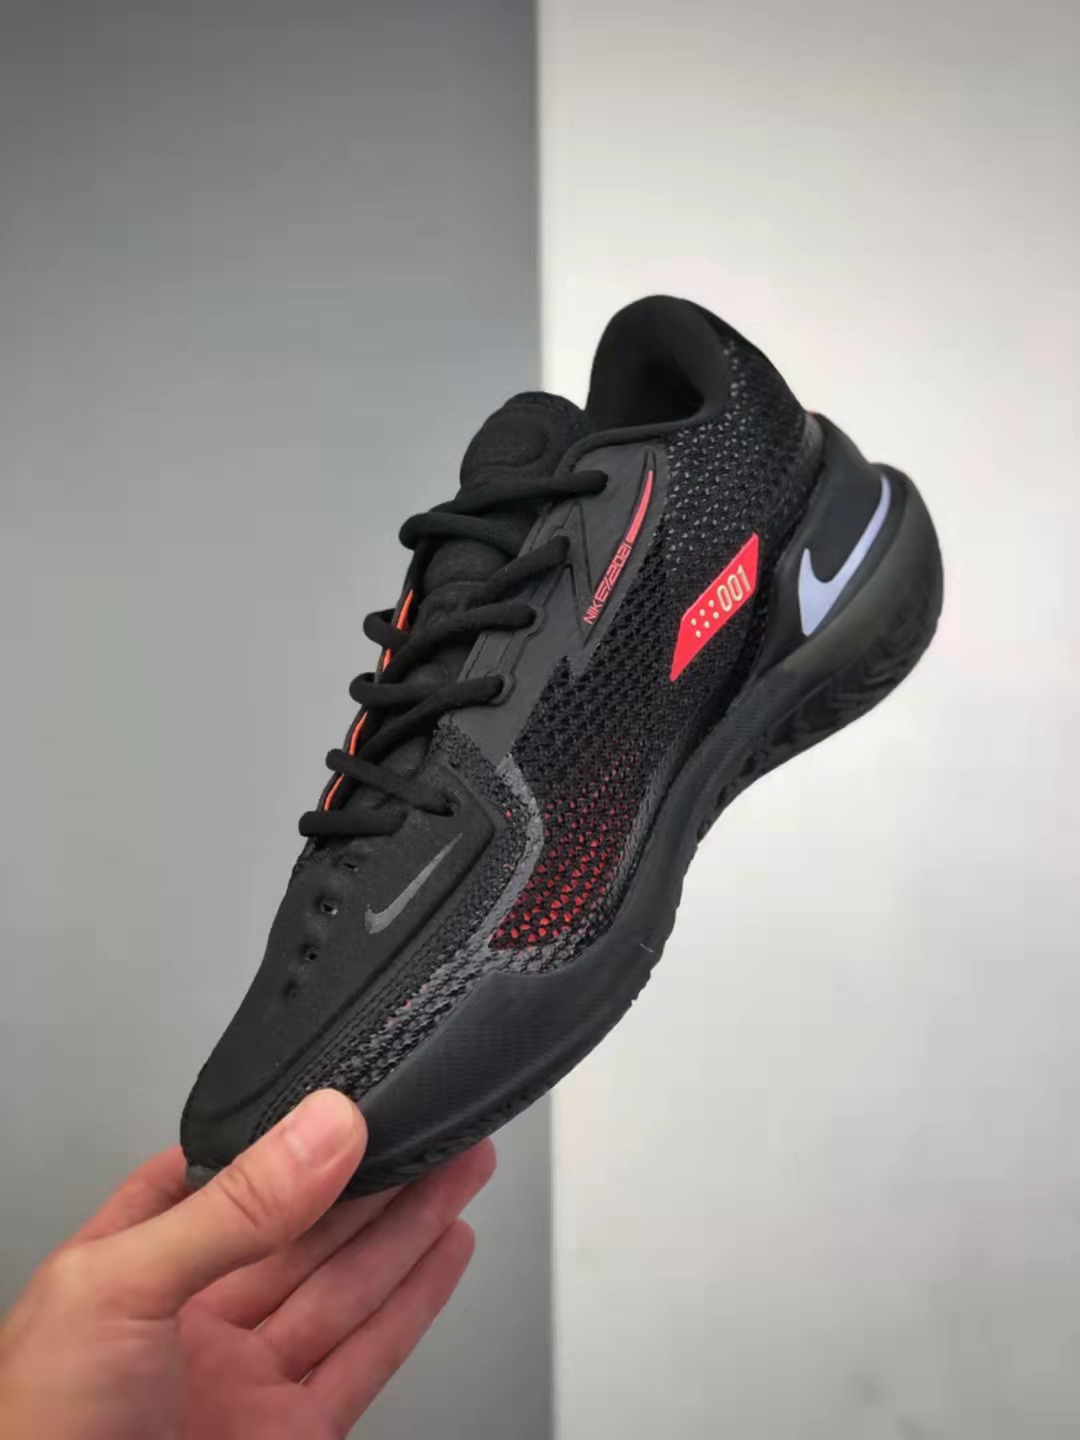 Nike Air Zoom GT Cut 'Black Hyper Crimson' CZ0175-001 | Lightweight and Responsive Training Shoes | Limited Edition